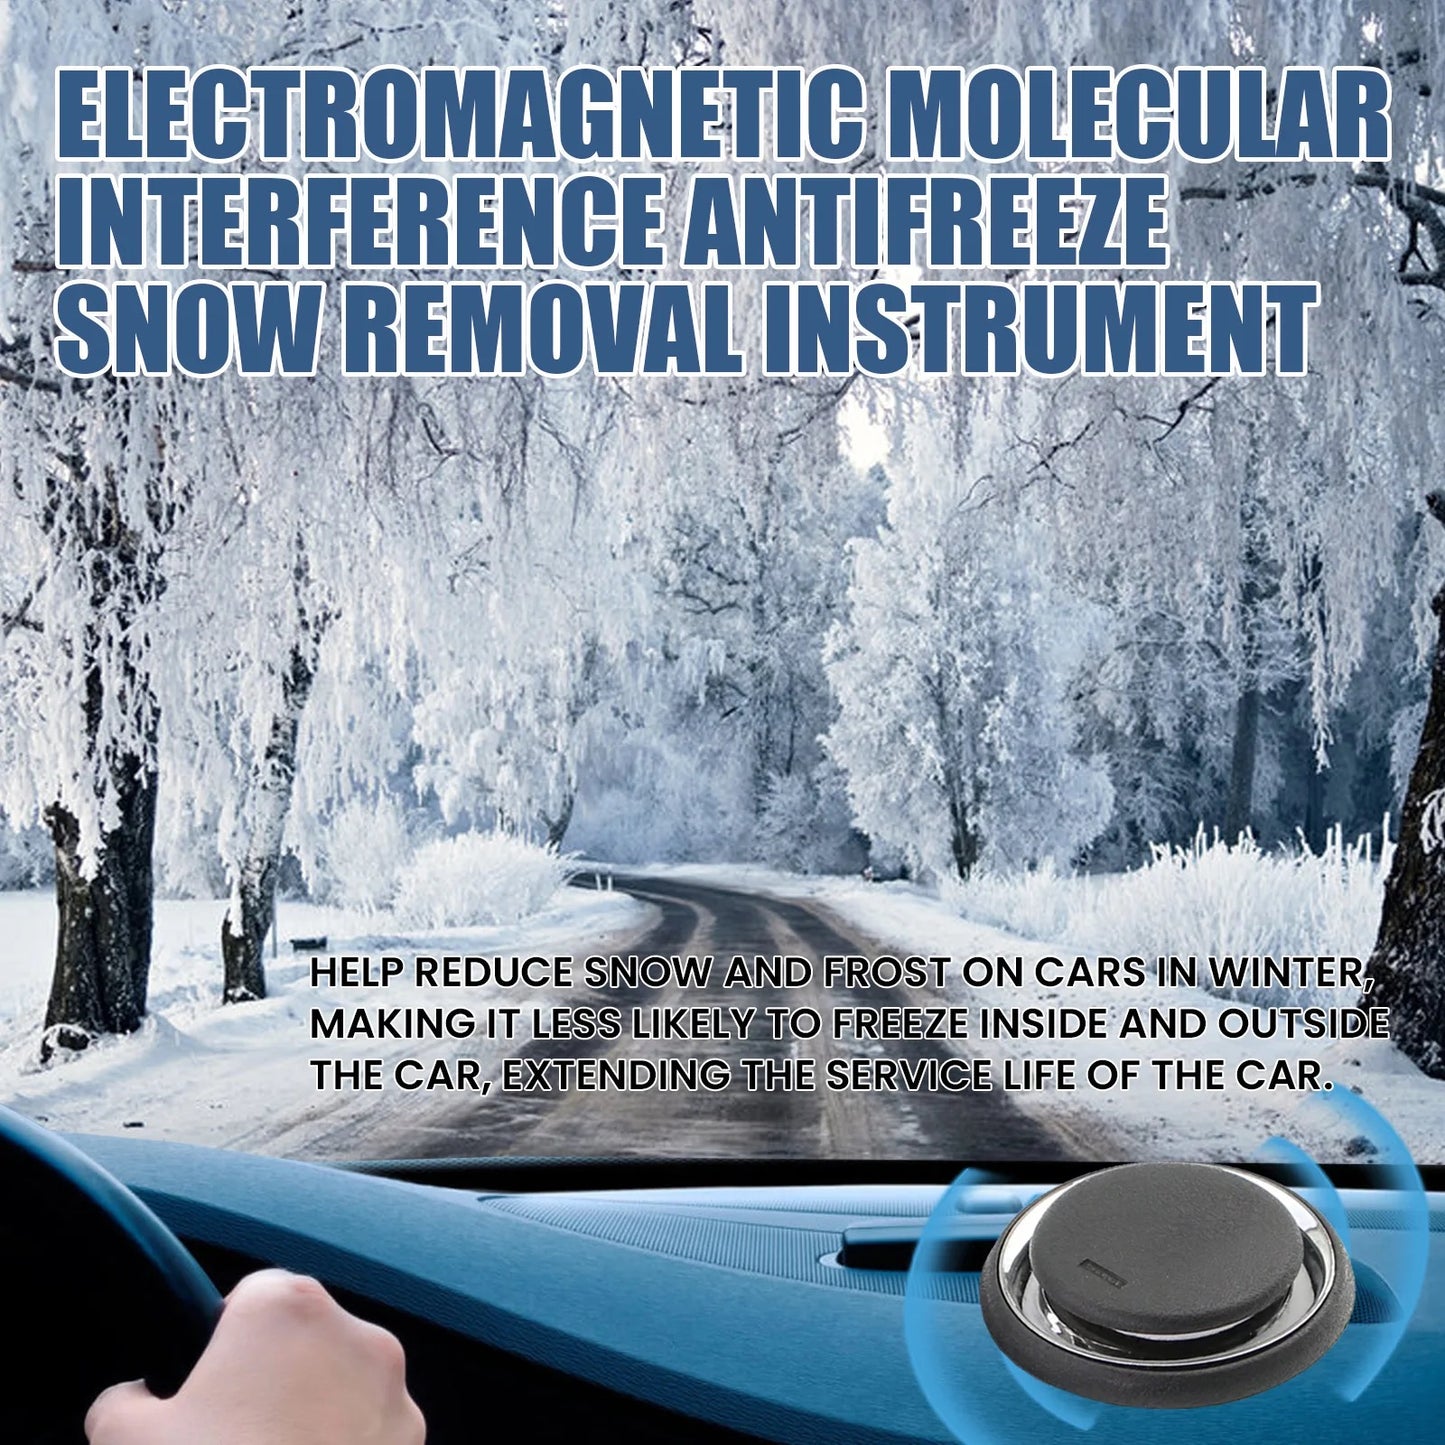 Electromagnetic Molecular Interference Antifreeze Snow Removal frostmelt